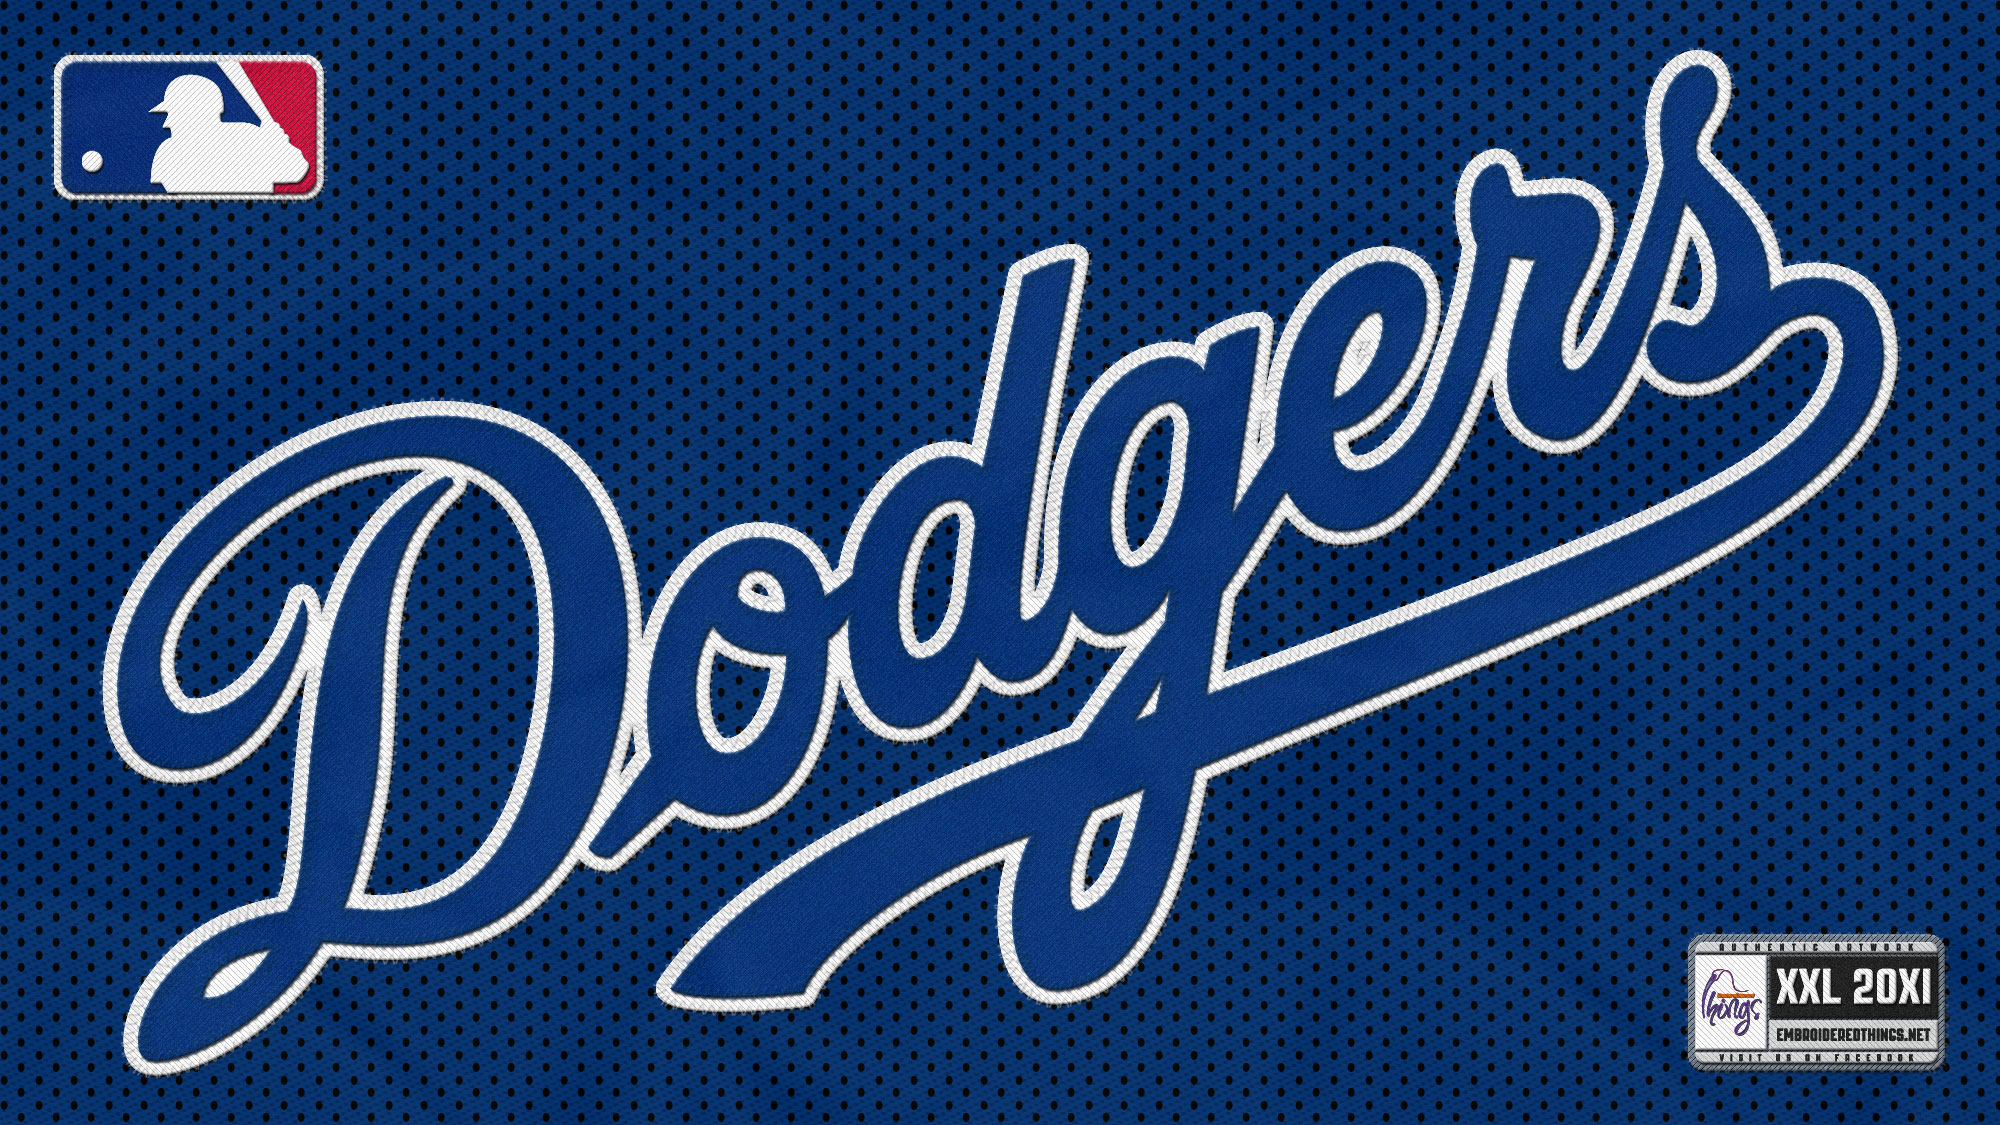  Angeles Dodgers wallpapers Los Angeles Dodgers background   Page 4